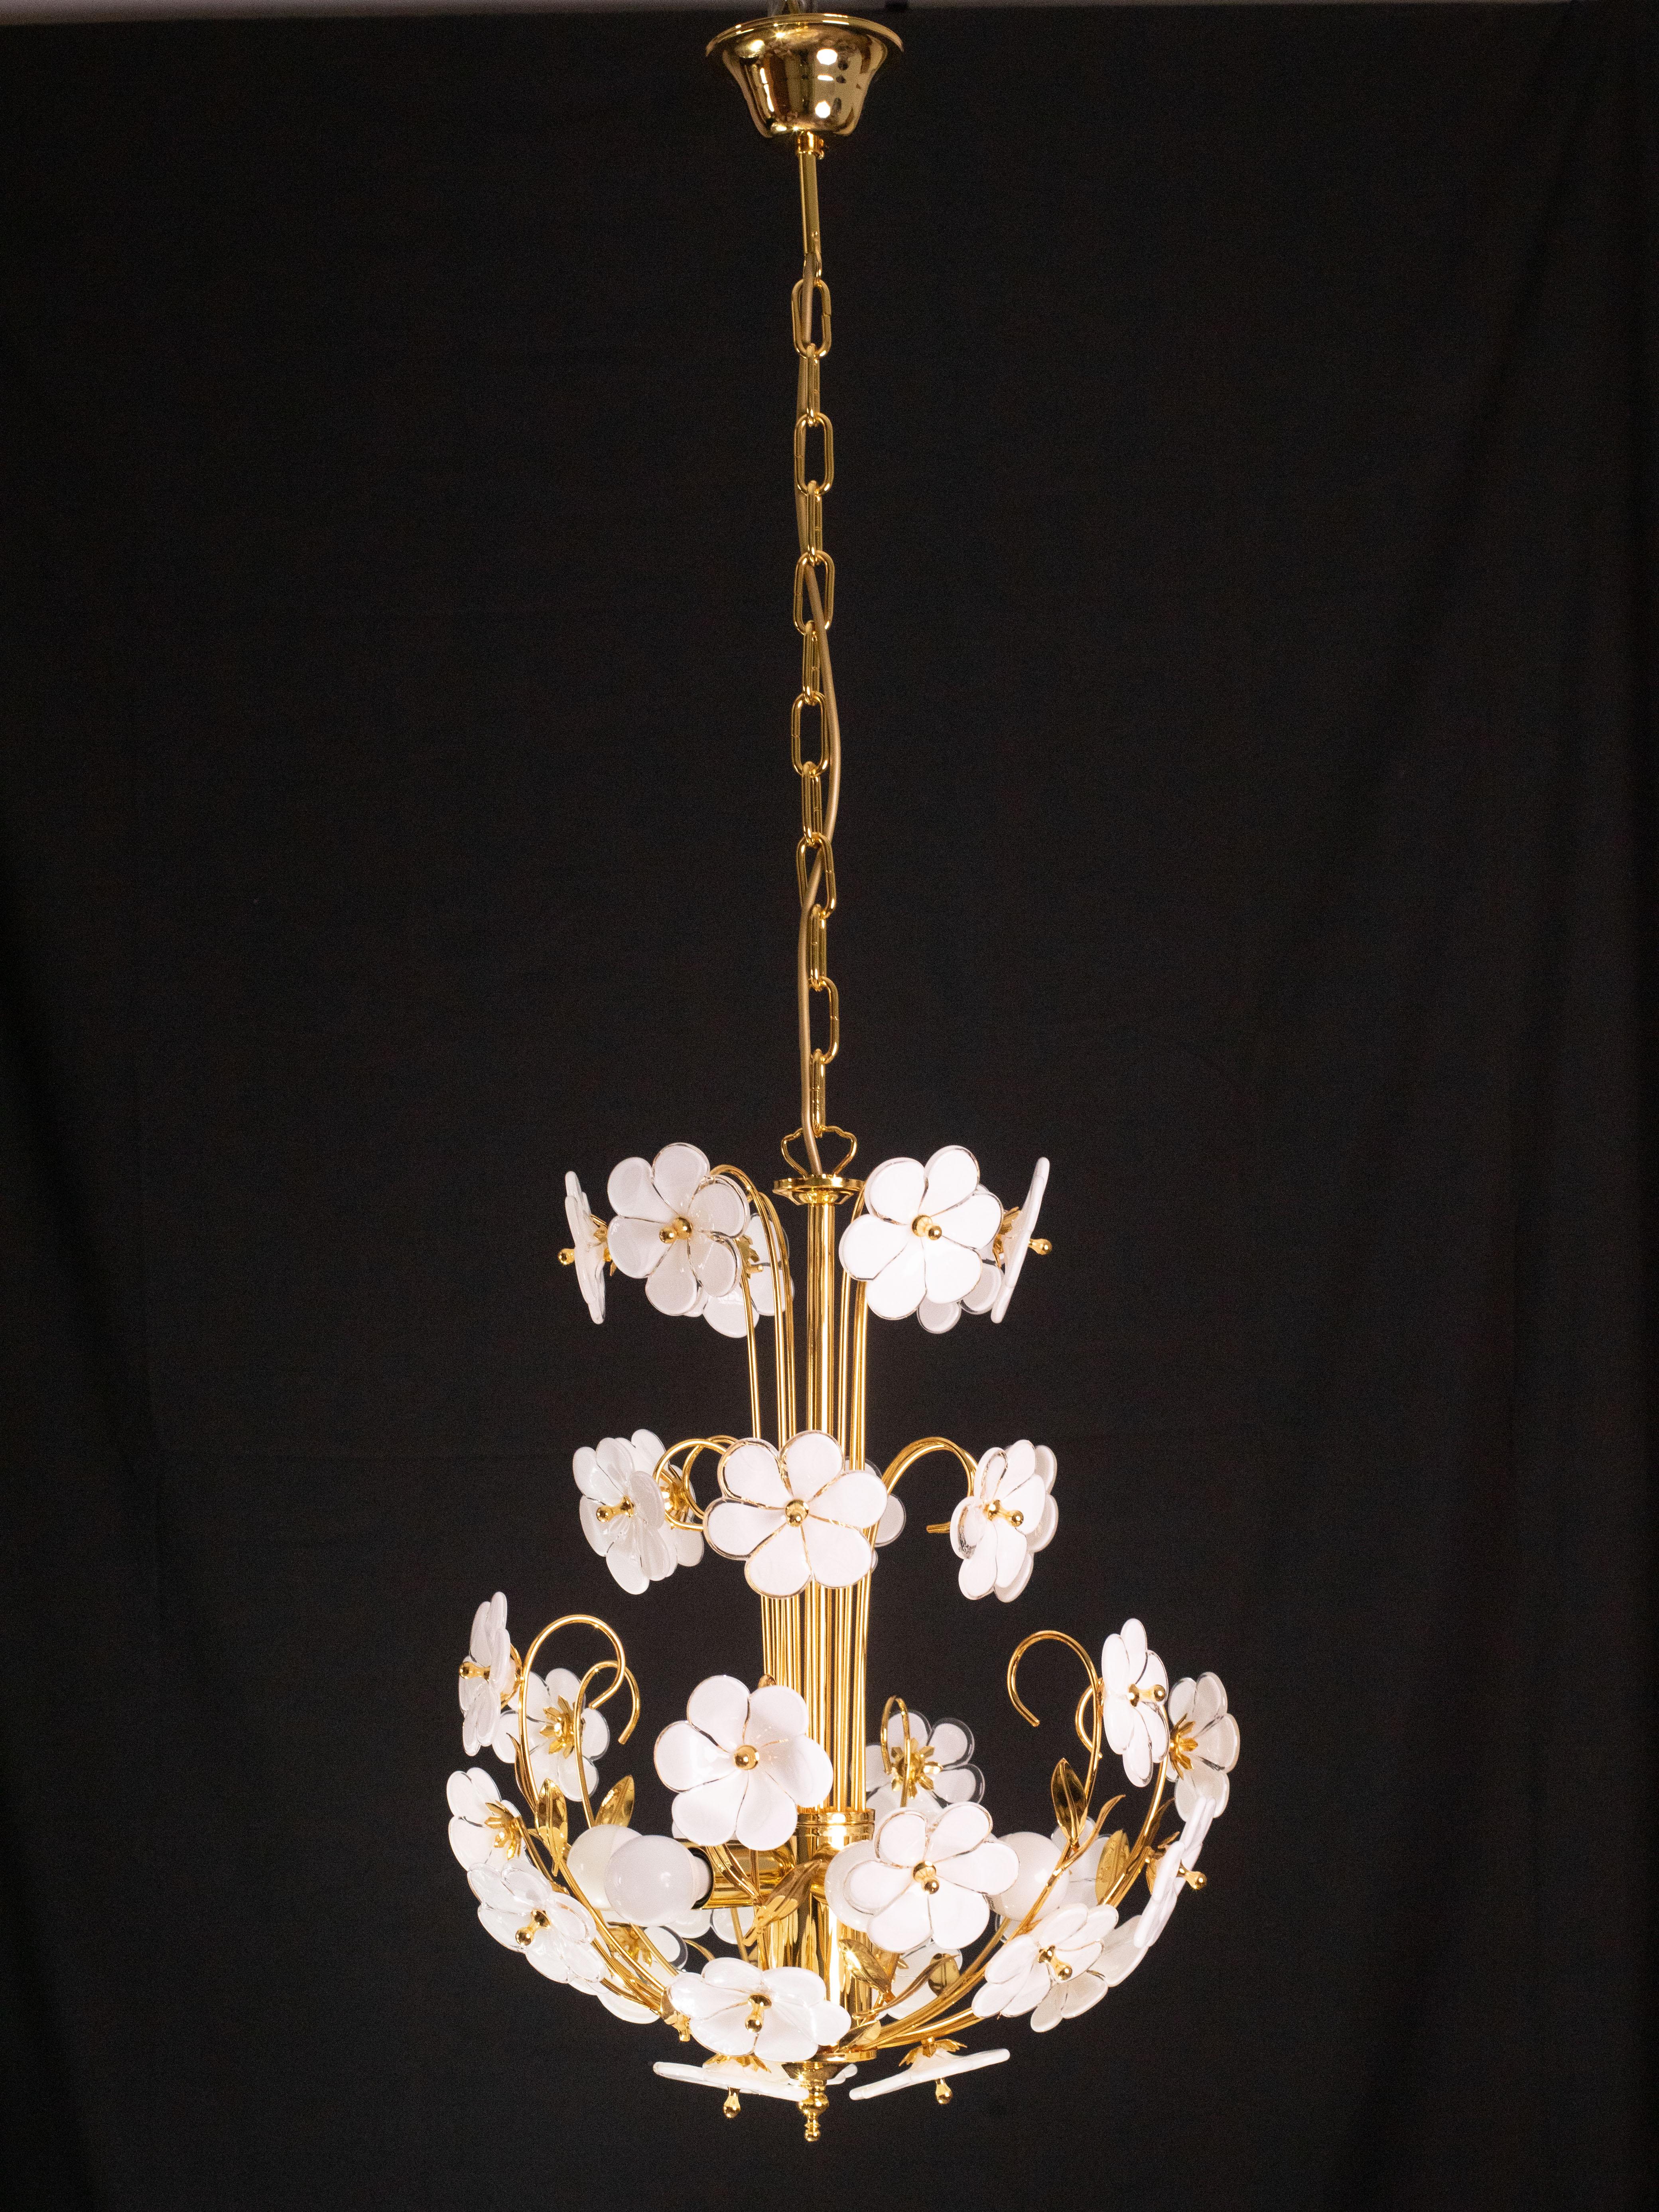 Spectacular Murano Chandelier Full of White Flowers, new bath gold, 1980s In Good Condition For Sale In Roma, IT